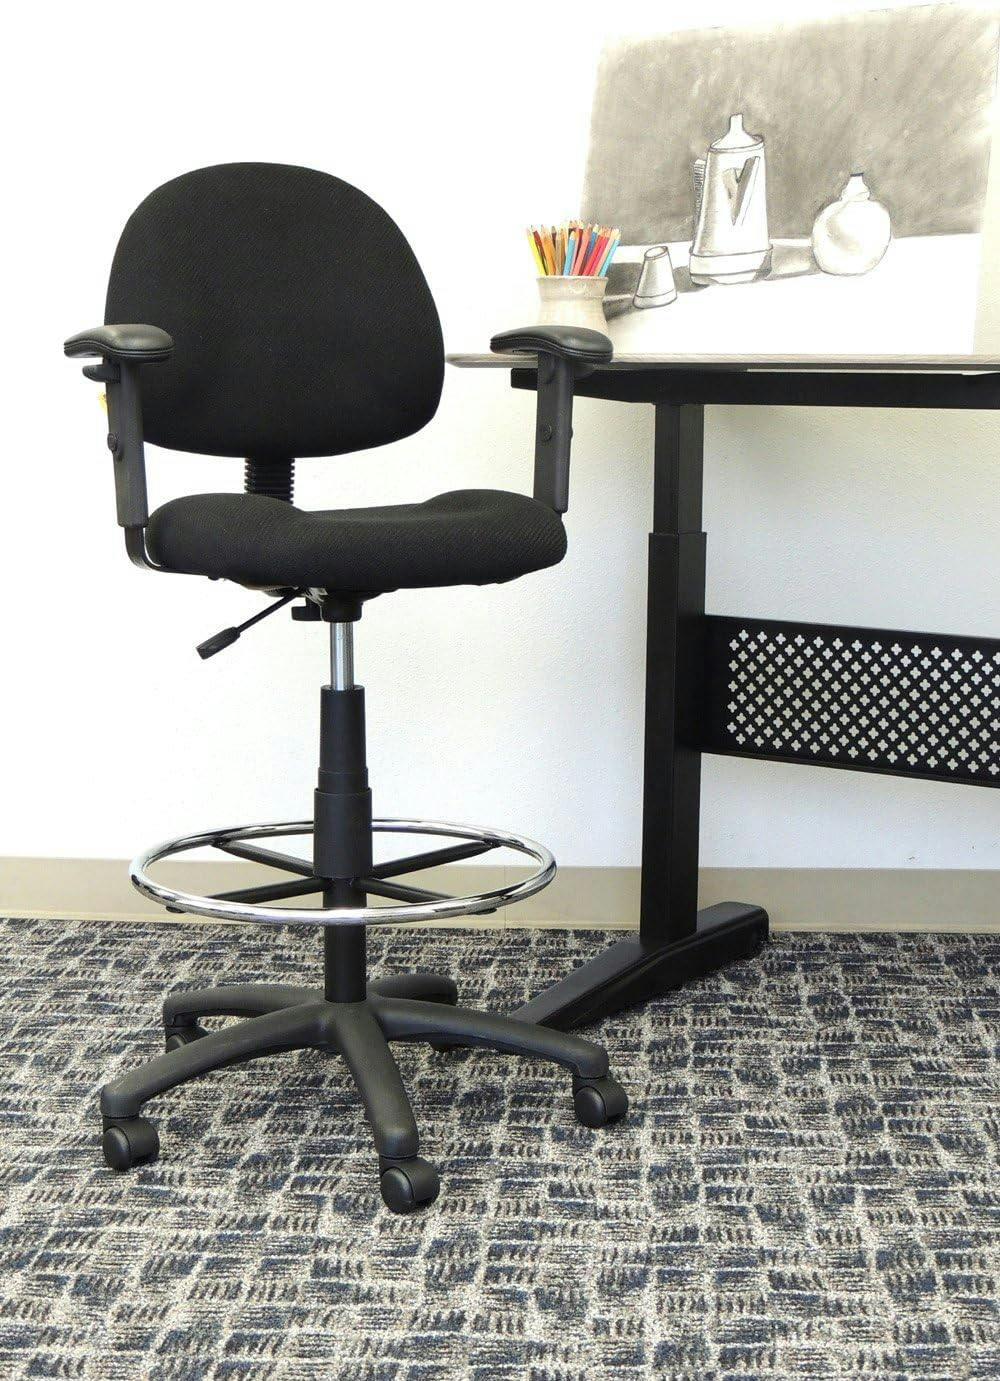 ErgoComfort Black Tweed Drafting Stool with Adjustable Arms and Chrome Footring